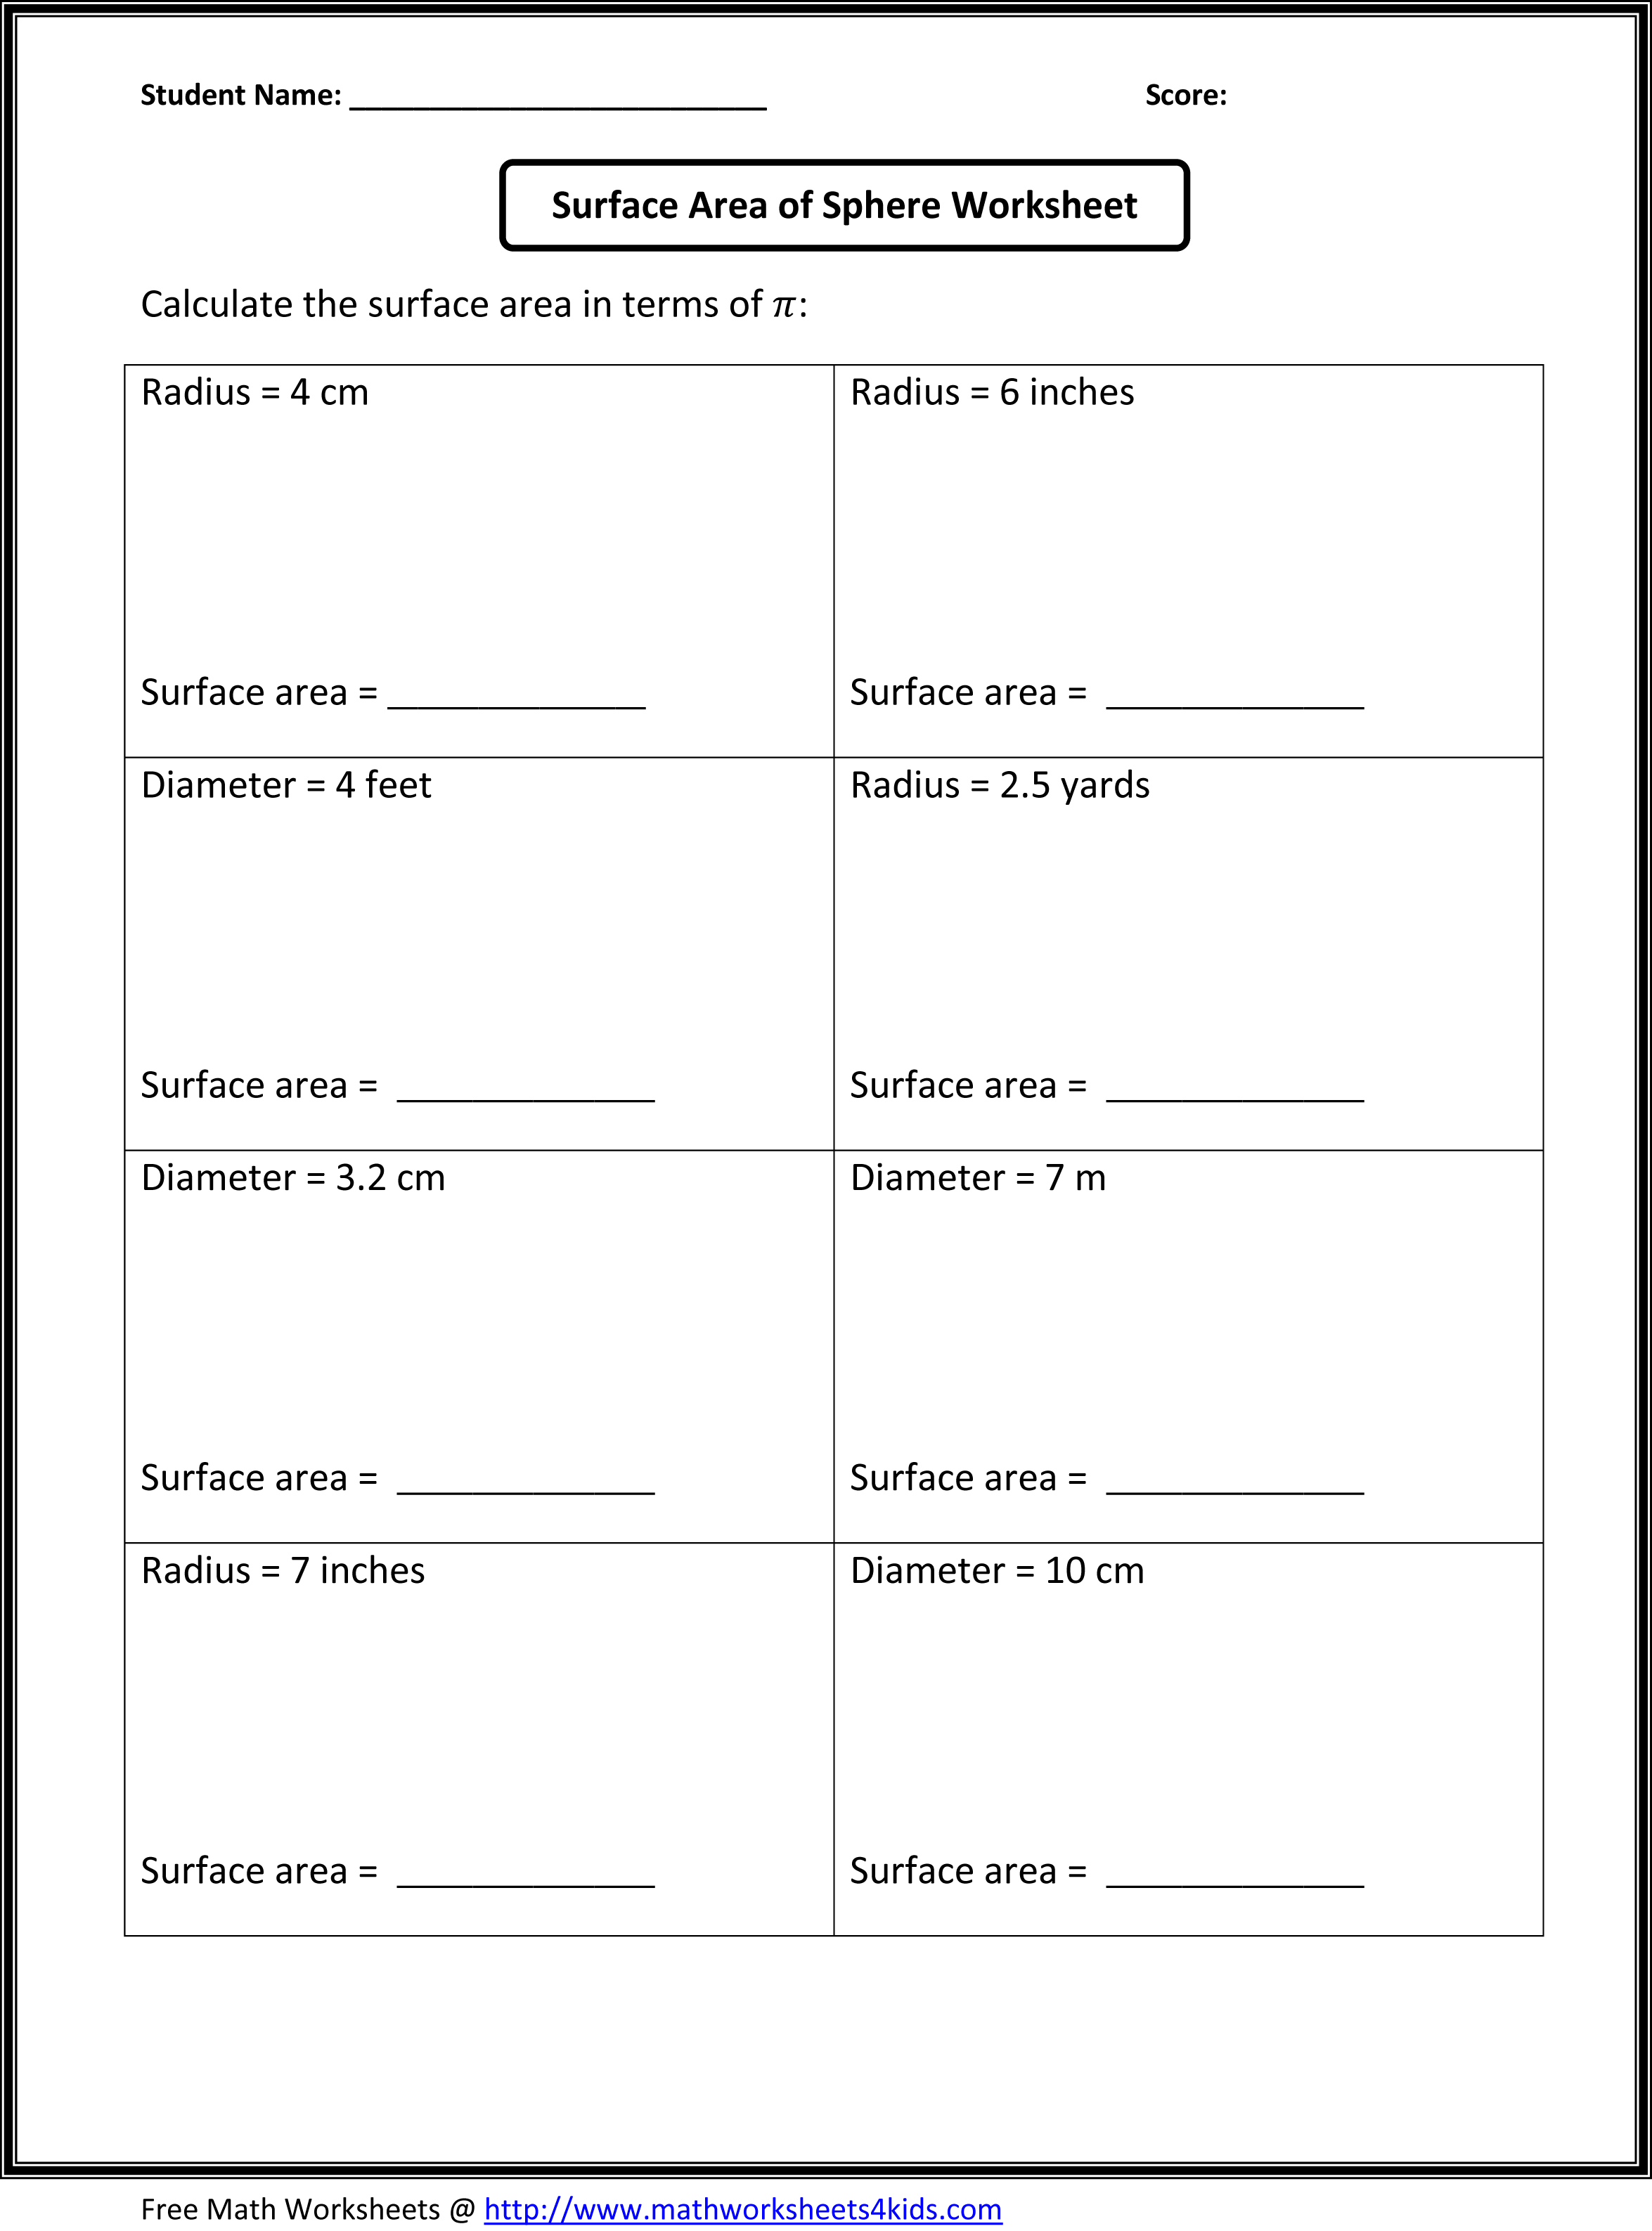 16 Best Images Of Order Of Operations And Exponents Worksheet Exponents Worksheets Order Of